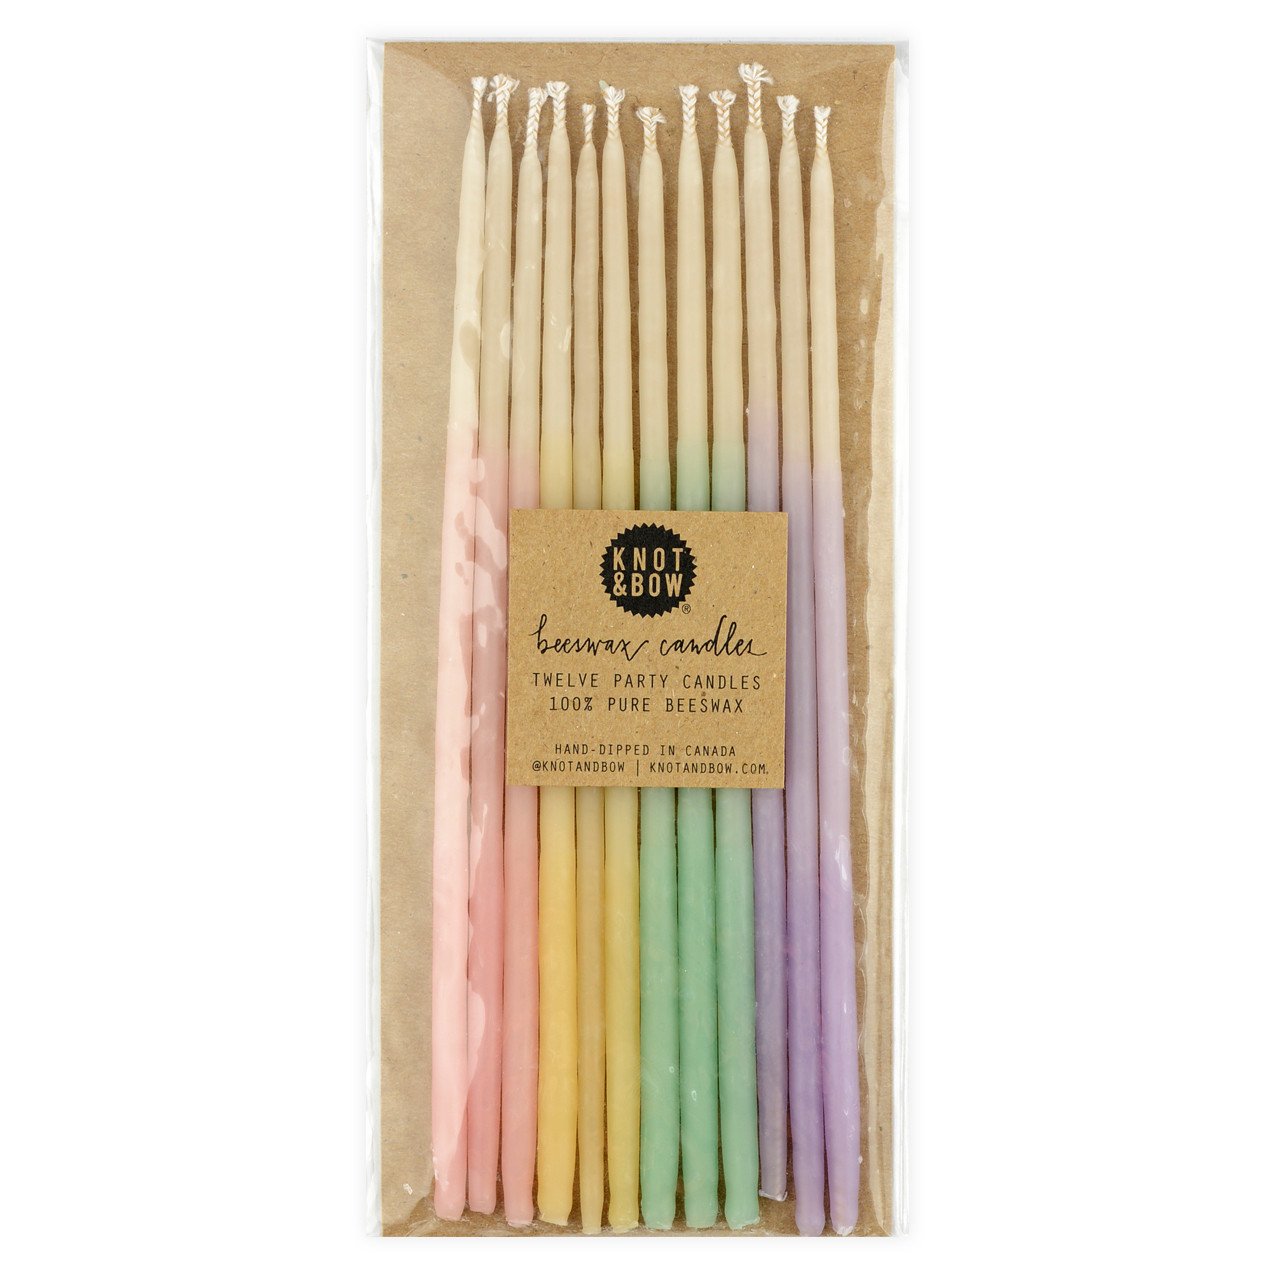 Knot & Bow Hand-Dipped Beeswax Birthday Candles Tall Ombré 